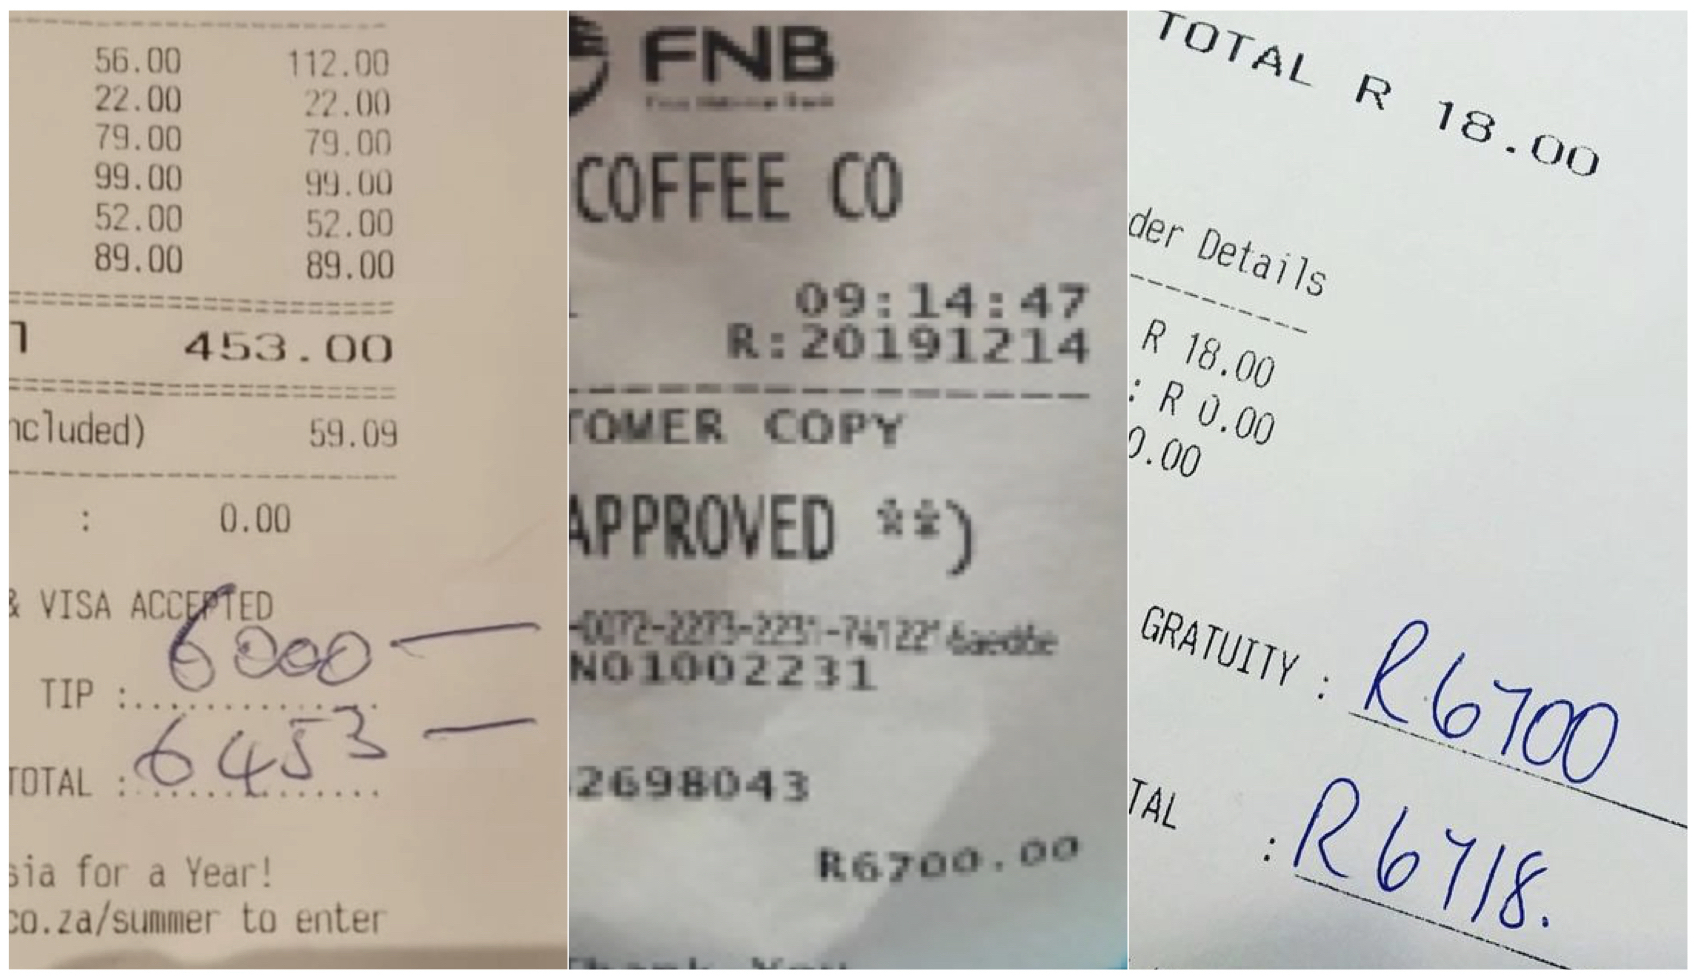 A 'Simply Asia' post is going viral with a R6,000 tip... but we just found 5 other restaurants where a similarly large tip has also been left in the last couple of days. Here's what we know about this new movement: